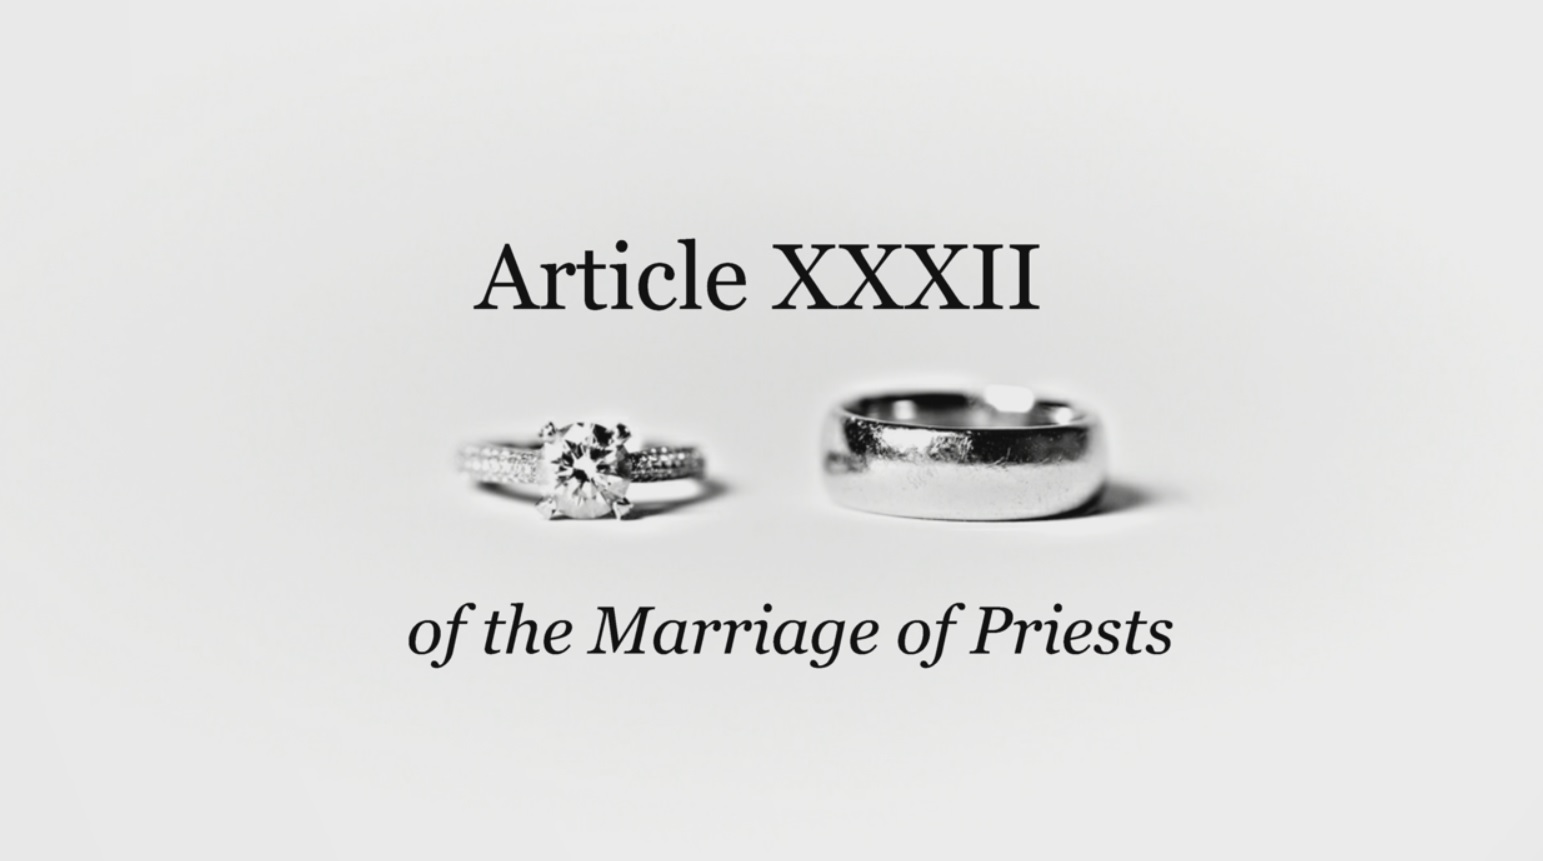 Article XXXII: Of the Marriage of Priests